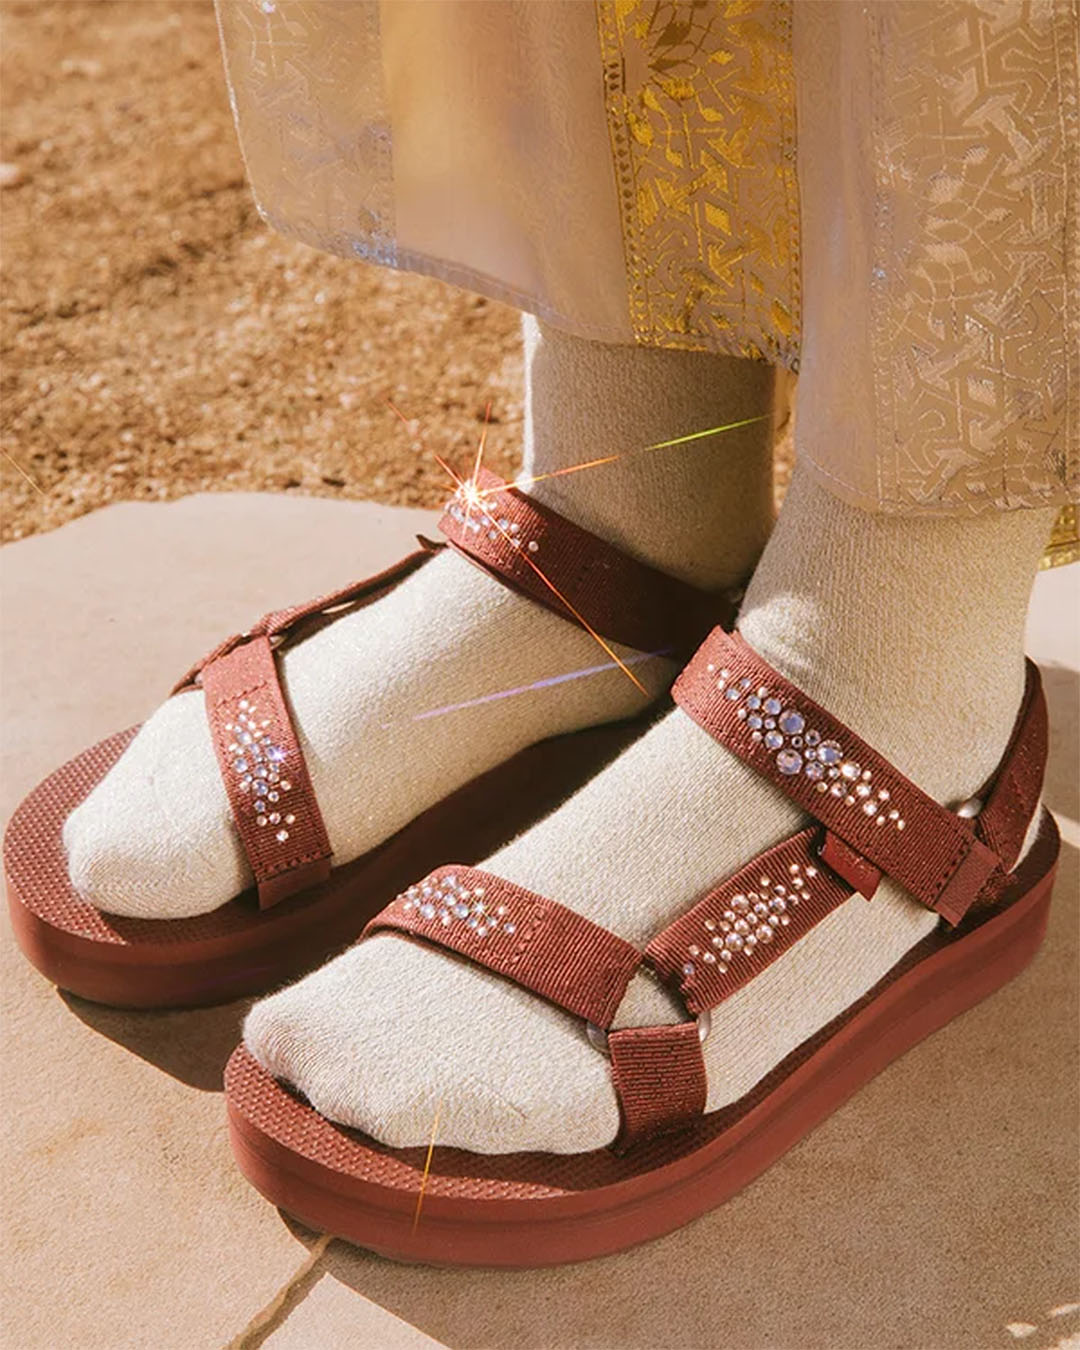 Someone wears cream socks with a new pair of Teva holiday sandals.